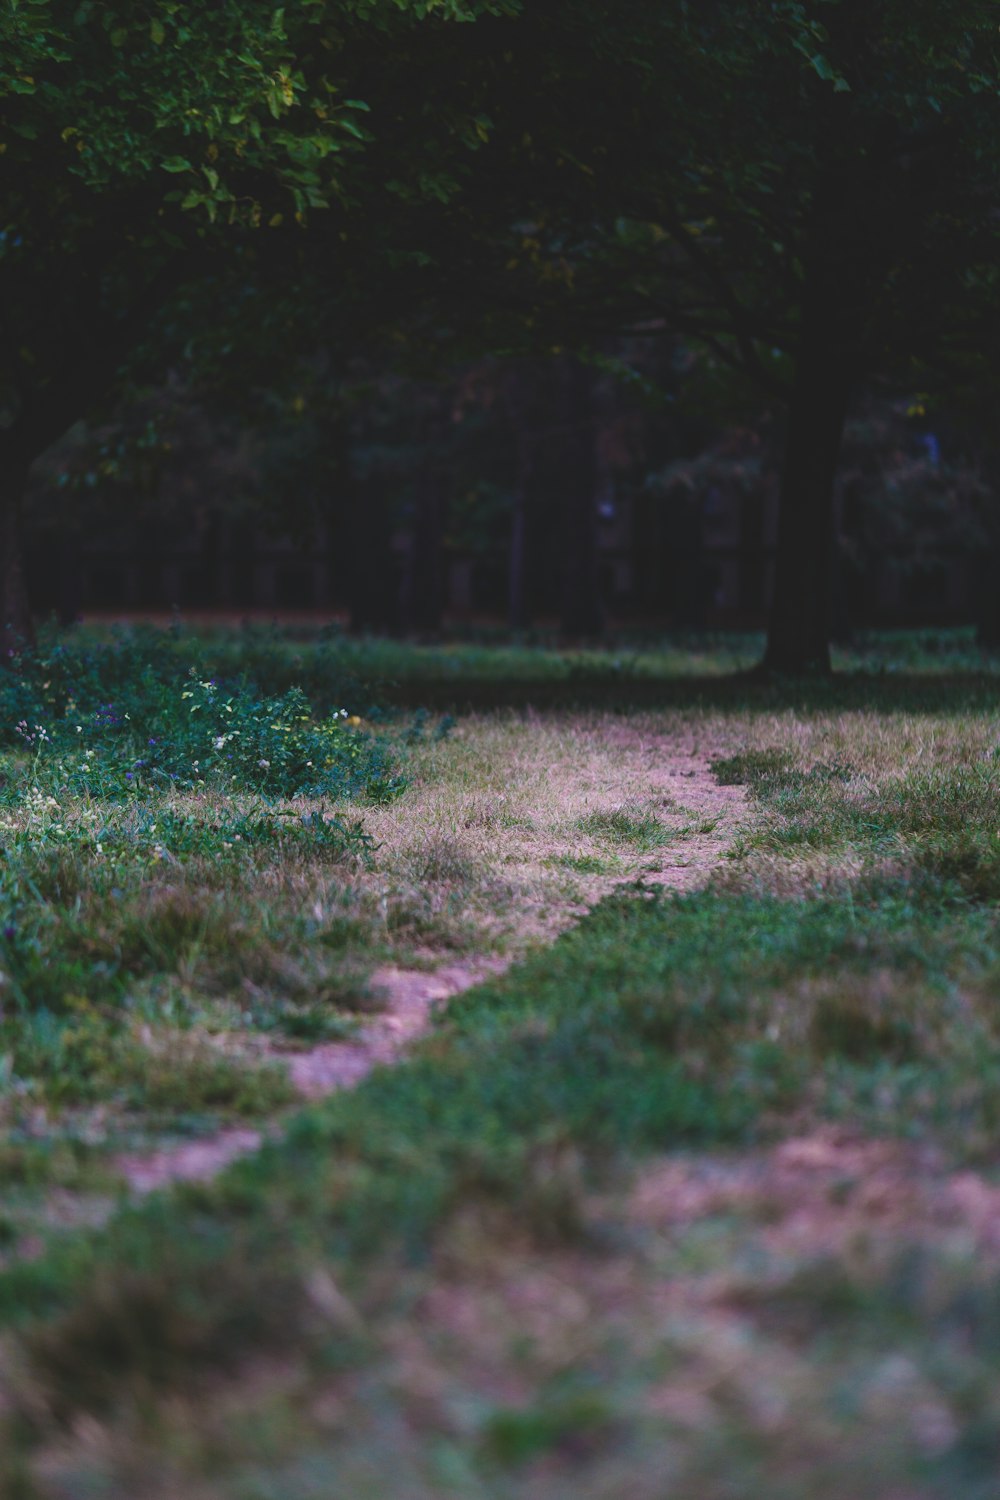 a path through a grassy field with trees in the background